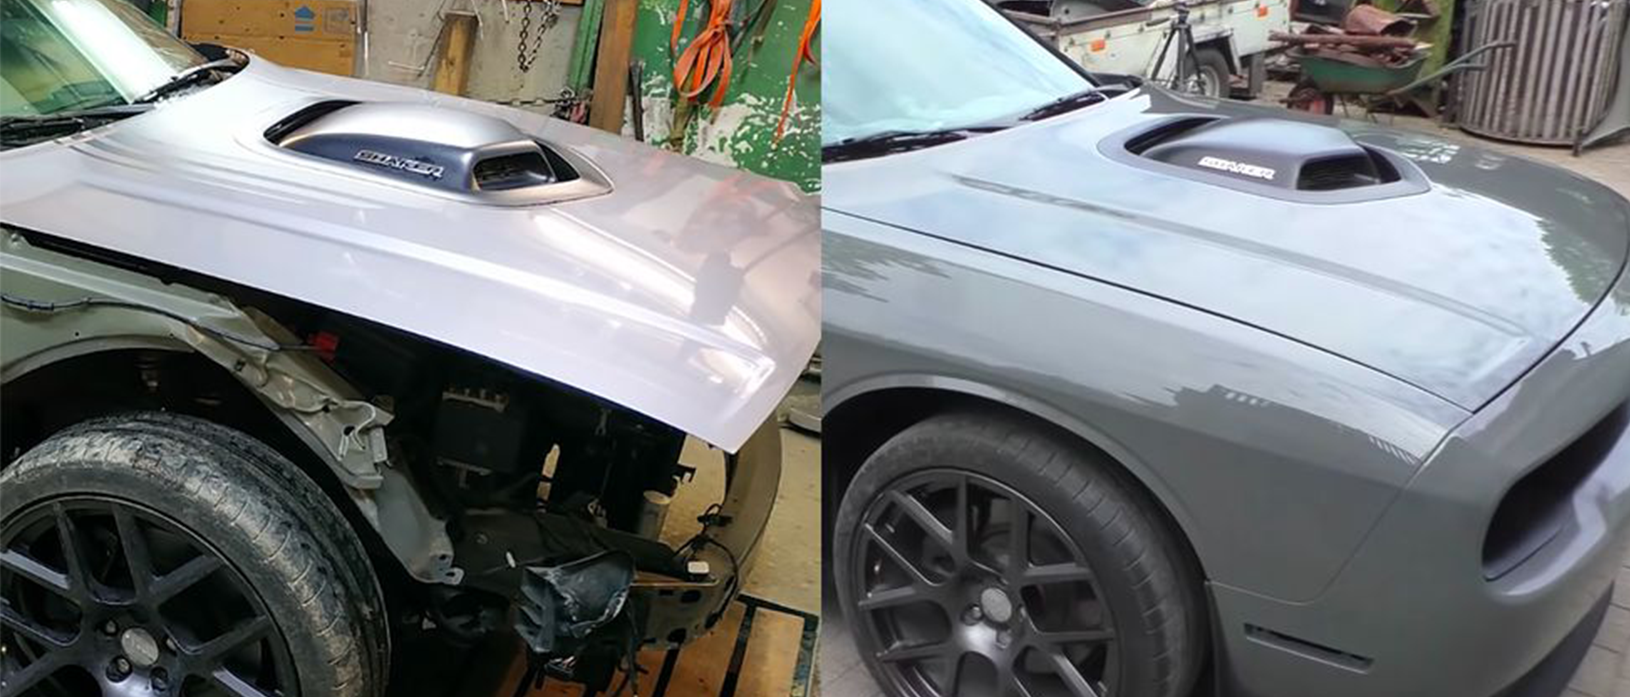 damaged dodge challenger before and after